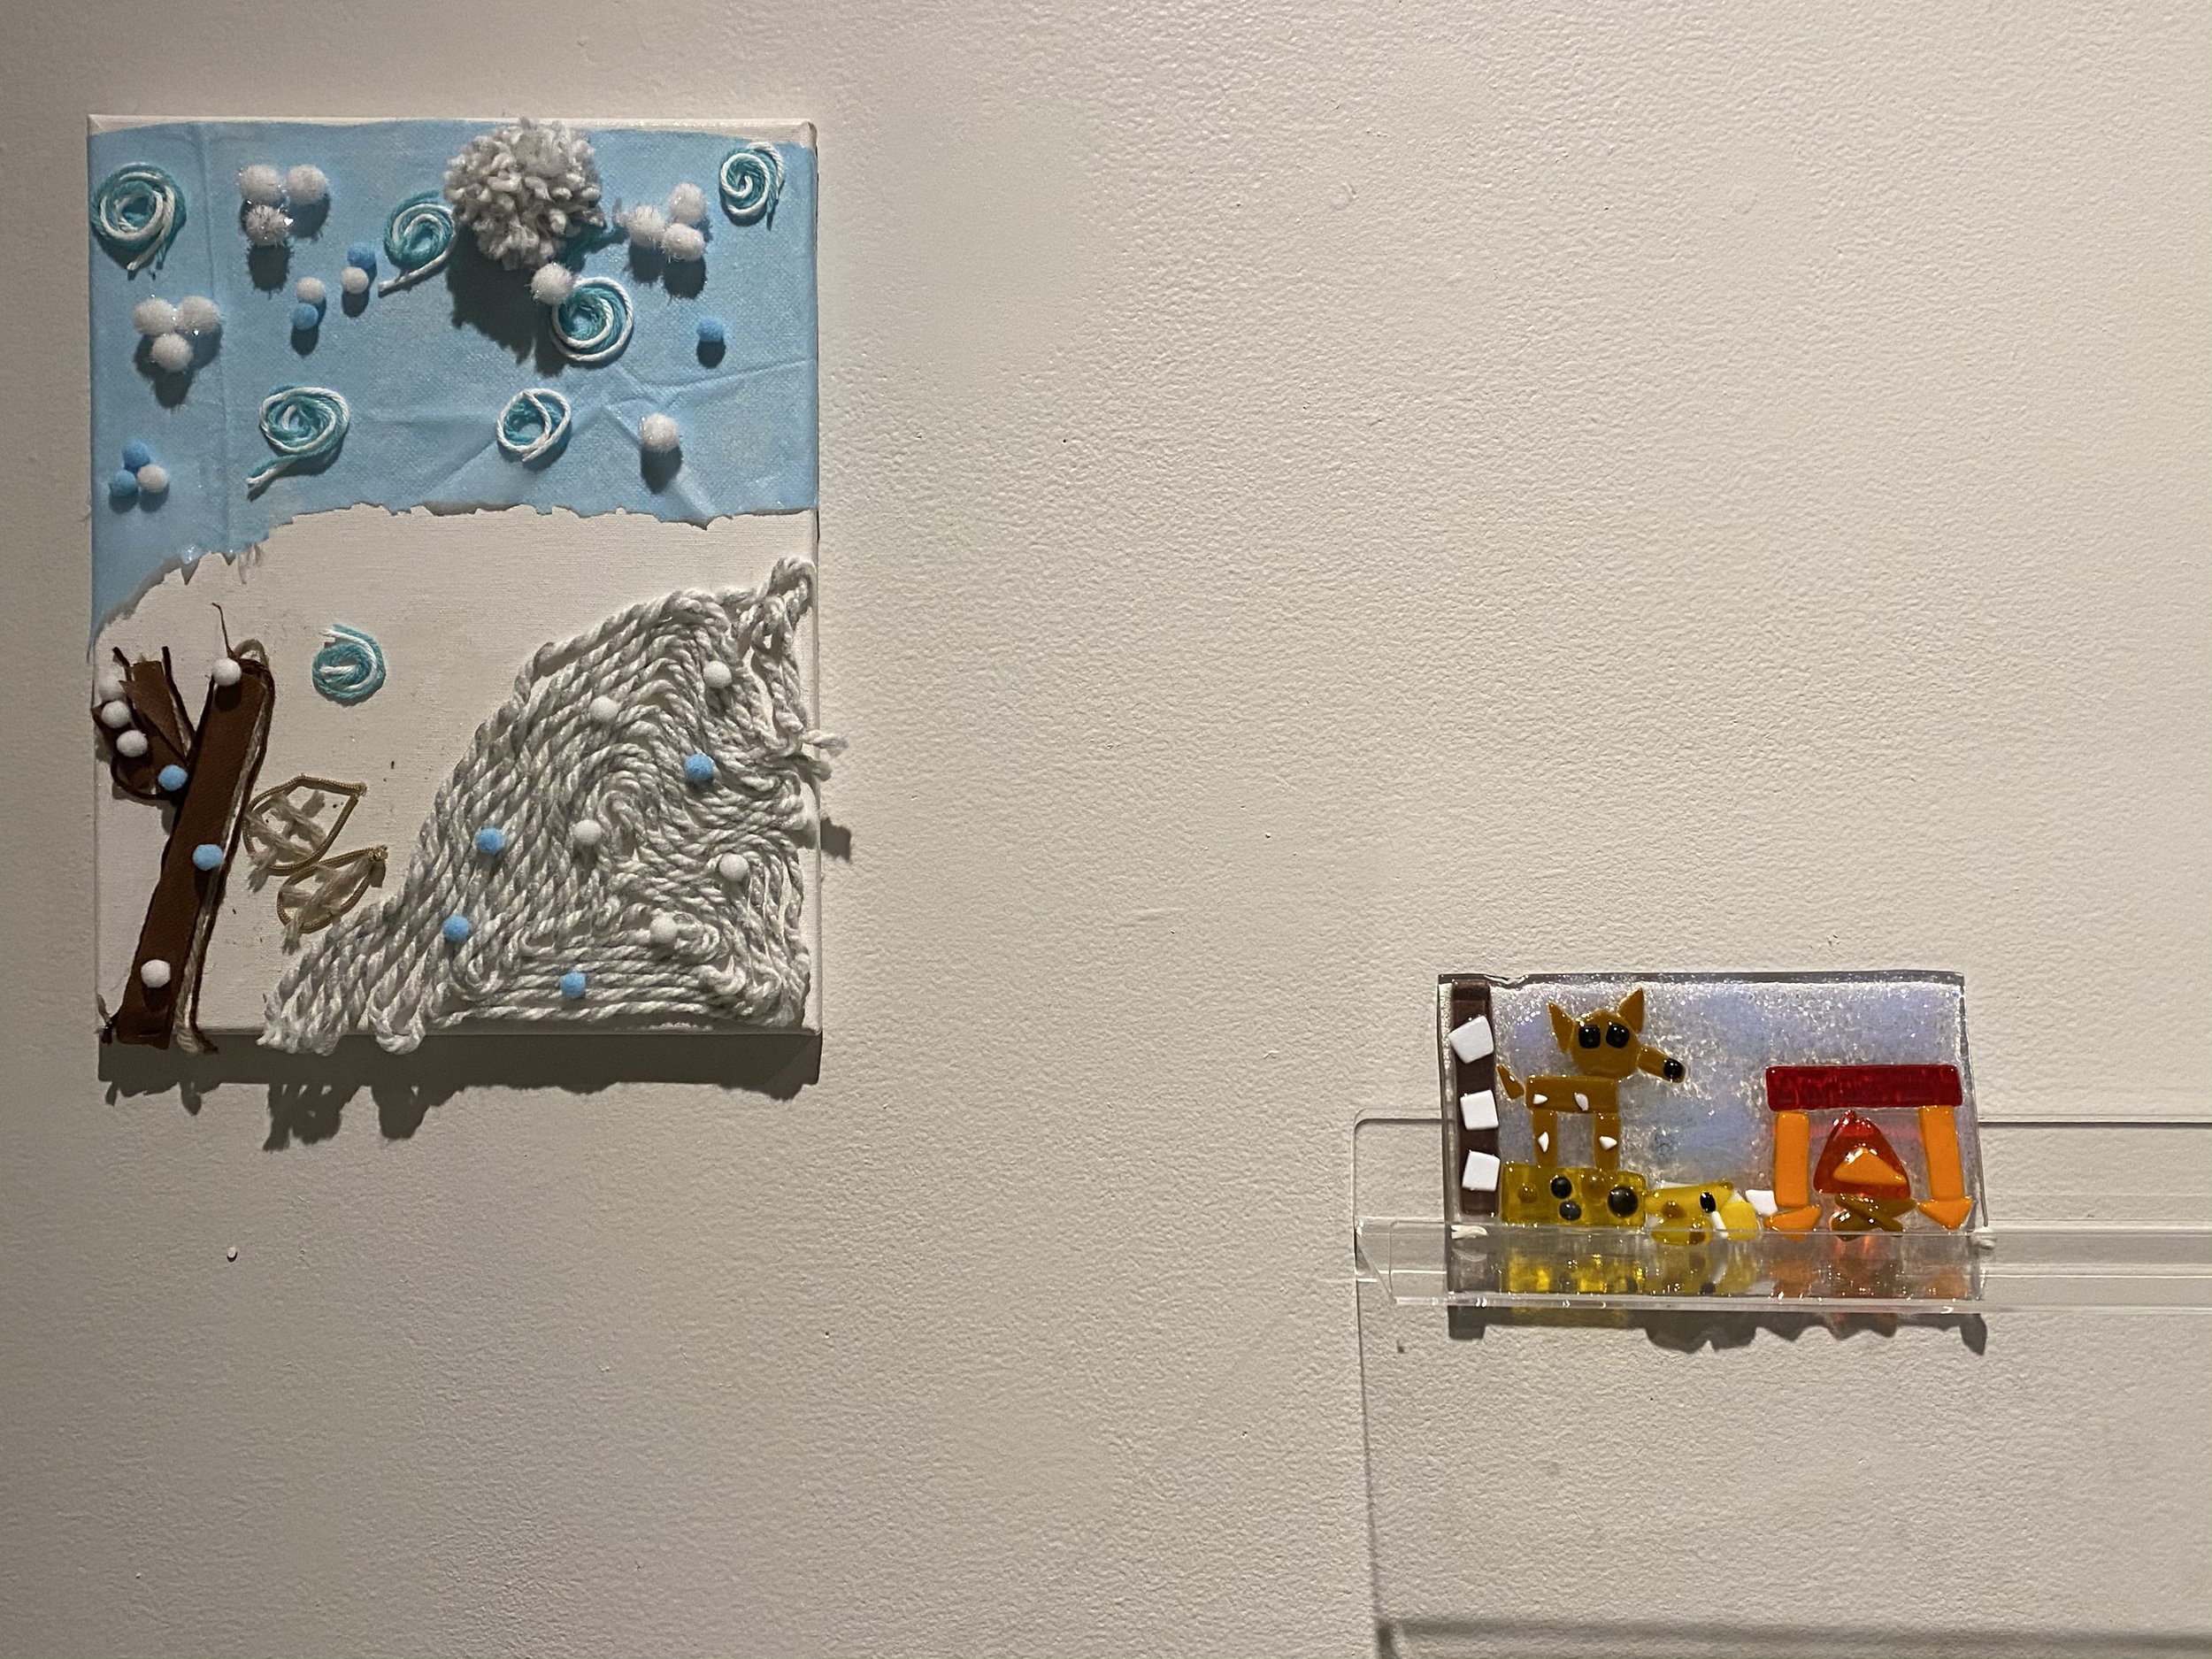  View of exhibition at VisArts, Rockville, MD, 2021, featuring recorded memories from elder adults from area that served as inspiration for children in fused glass and fabric collage workshops. 